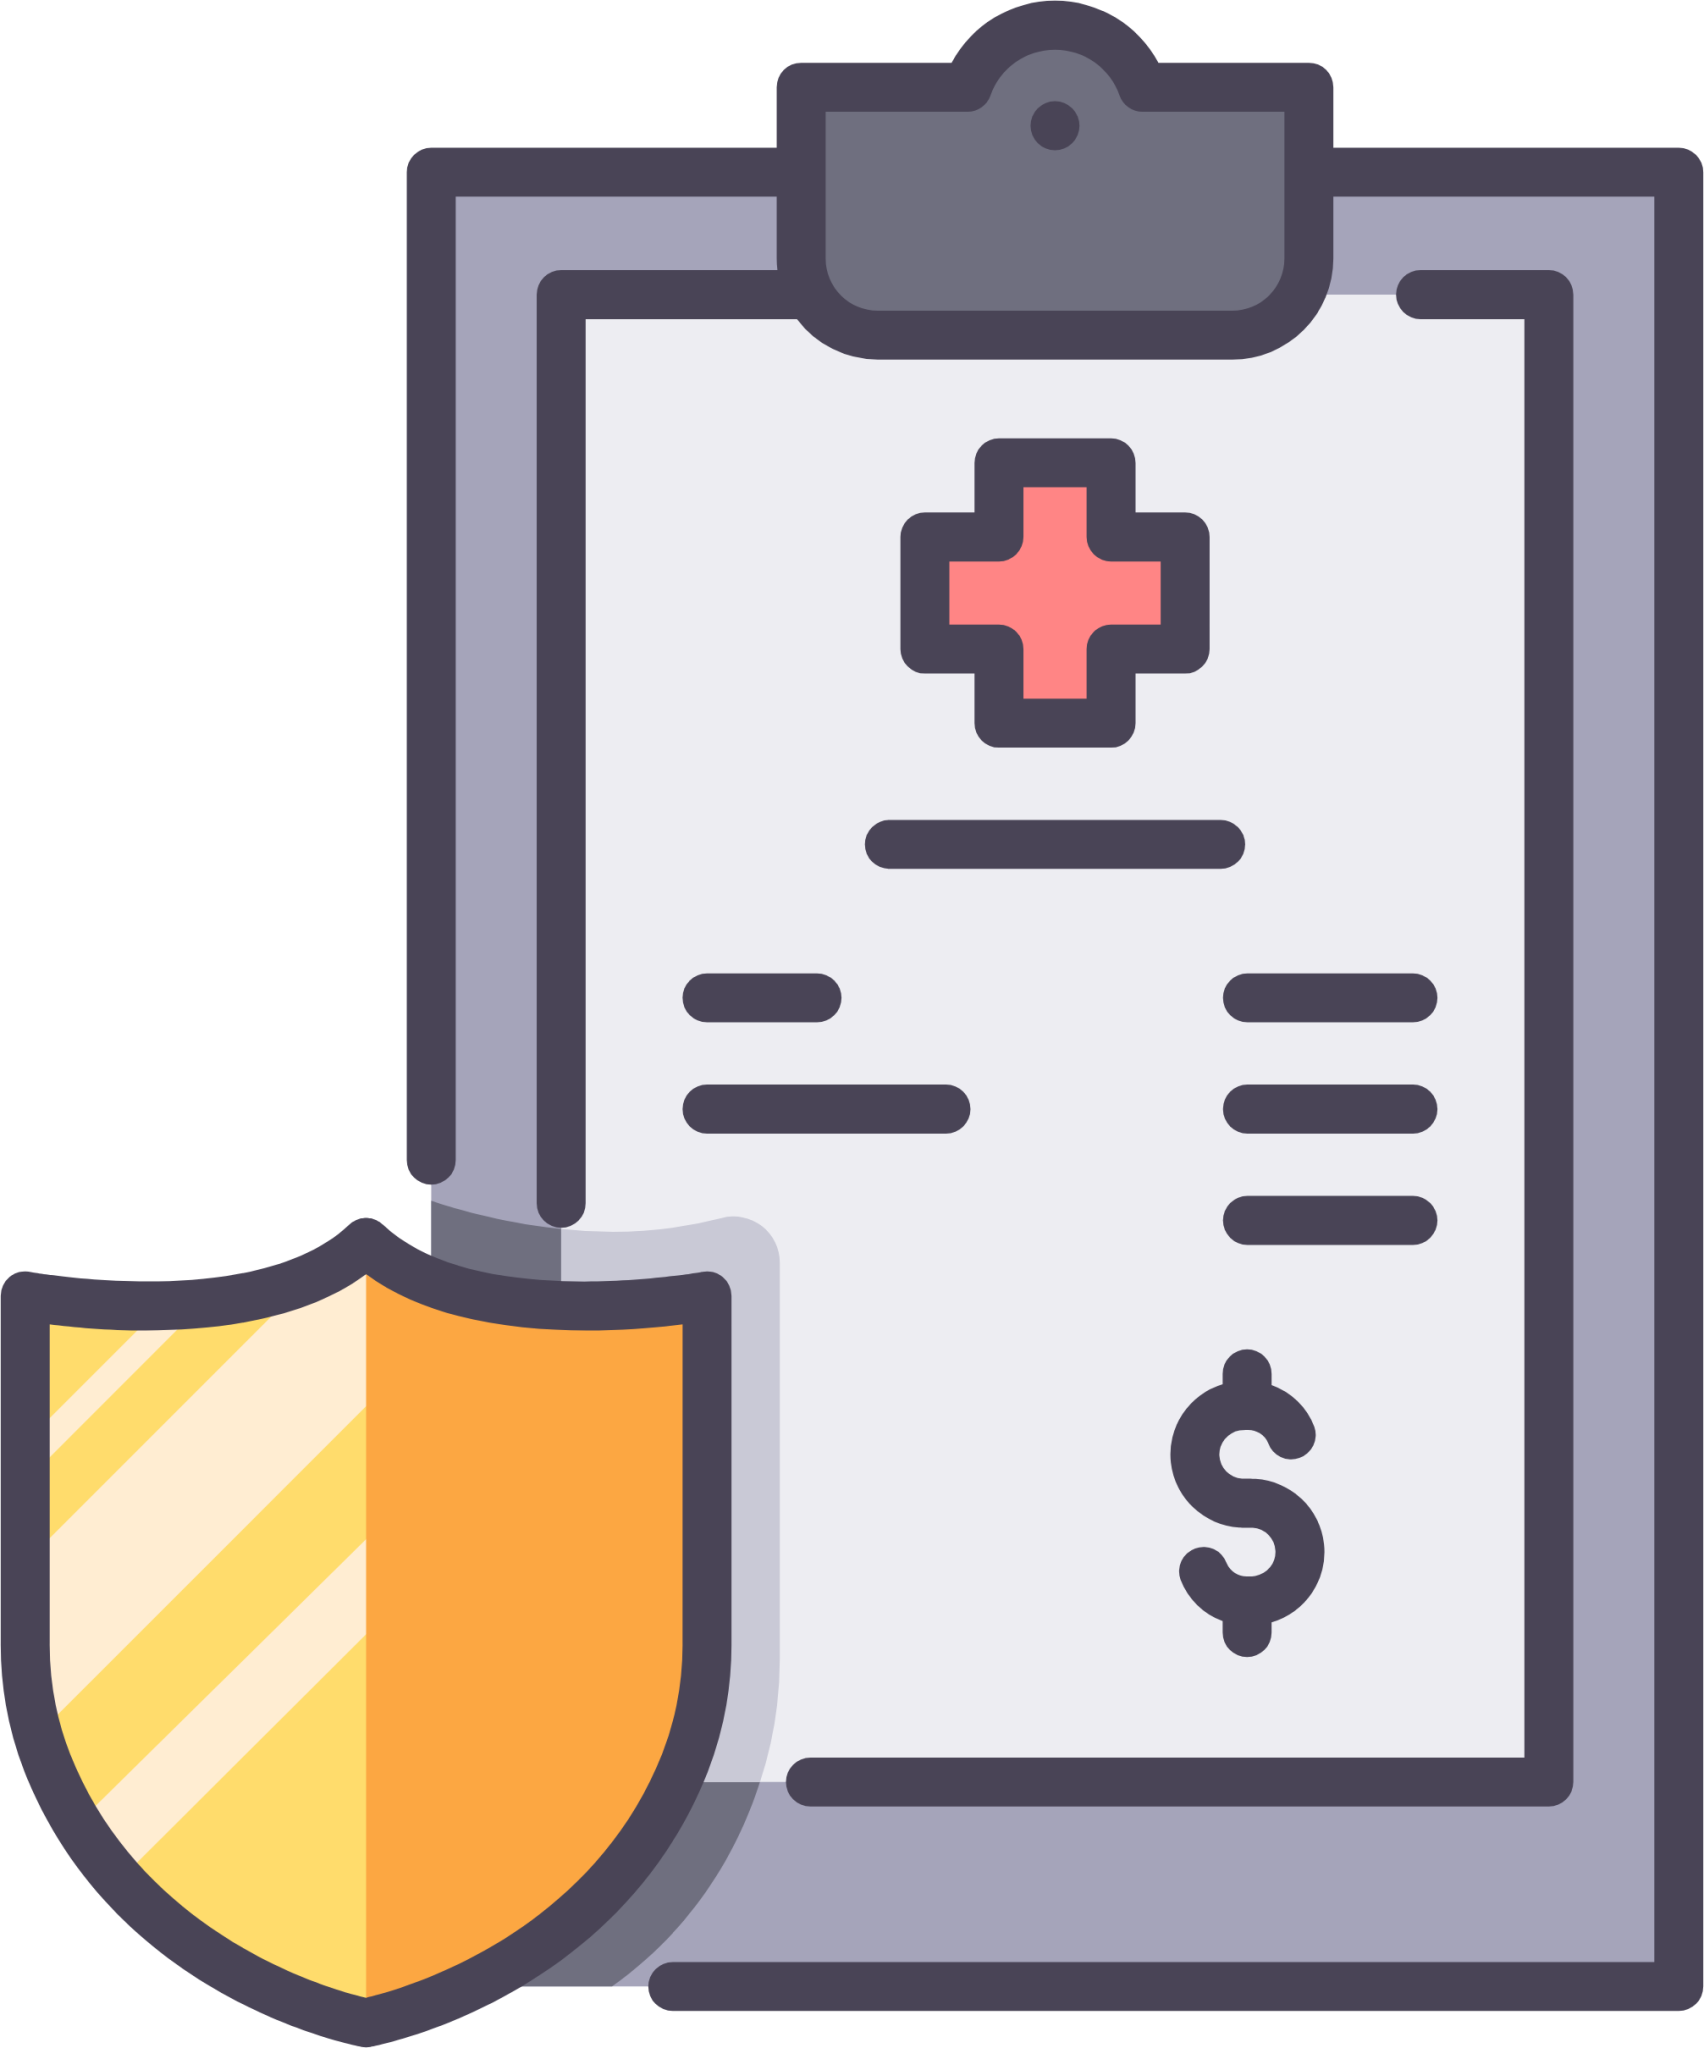 medical report icon png